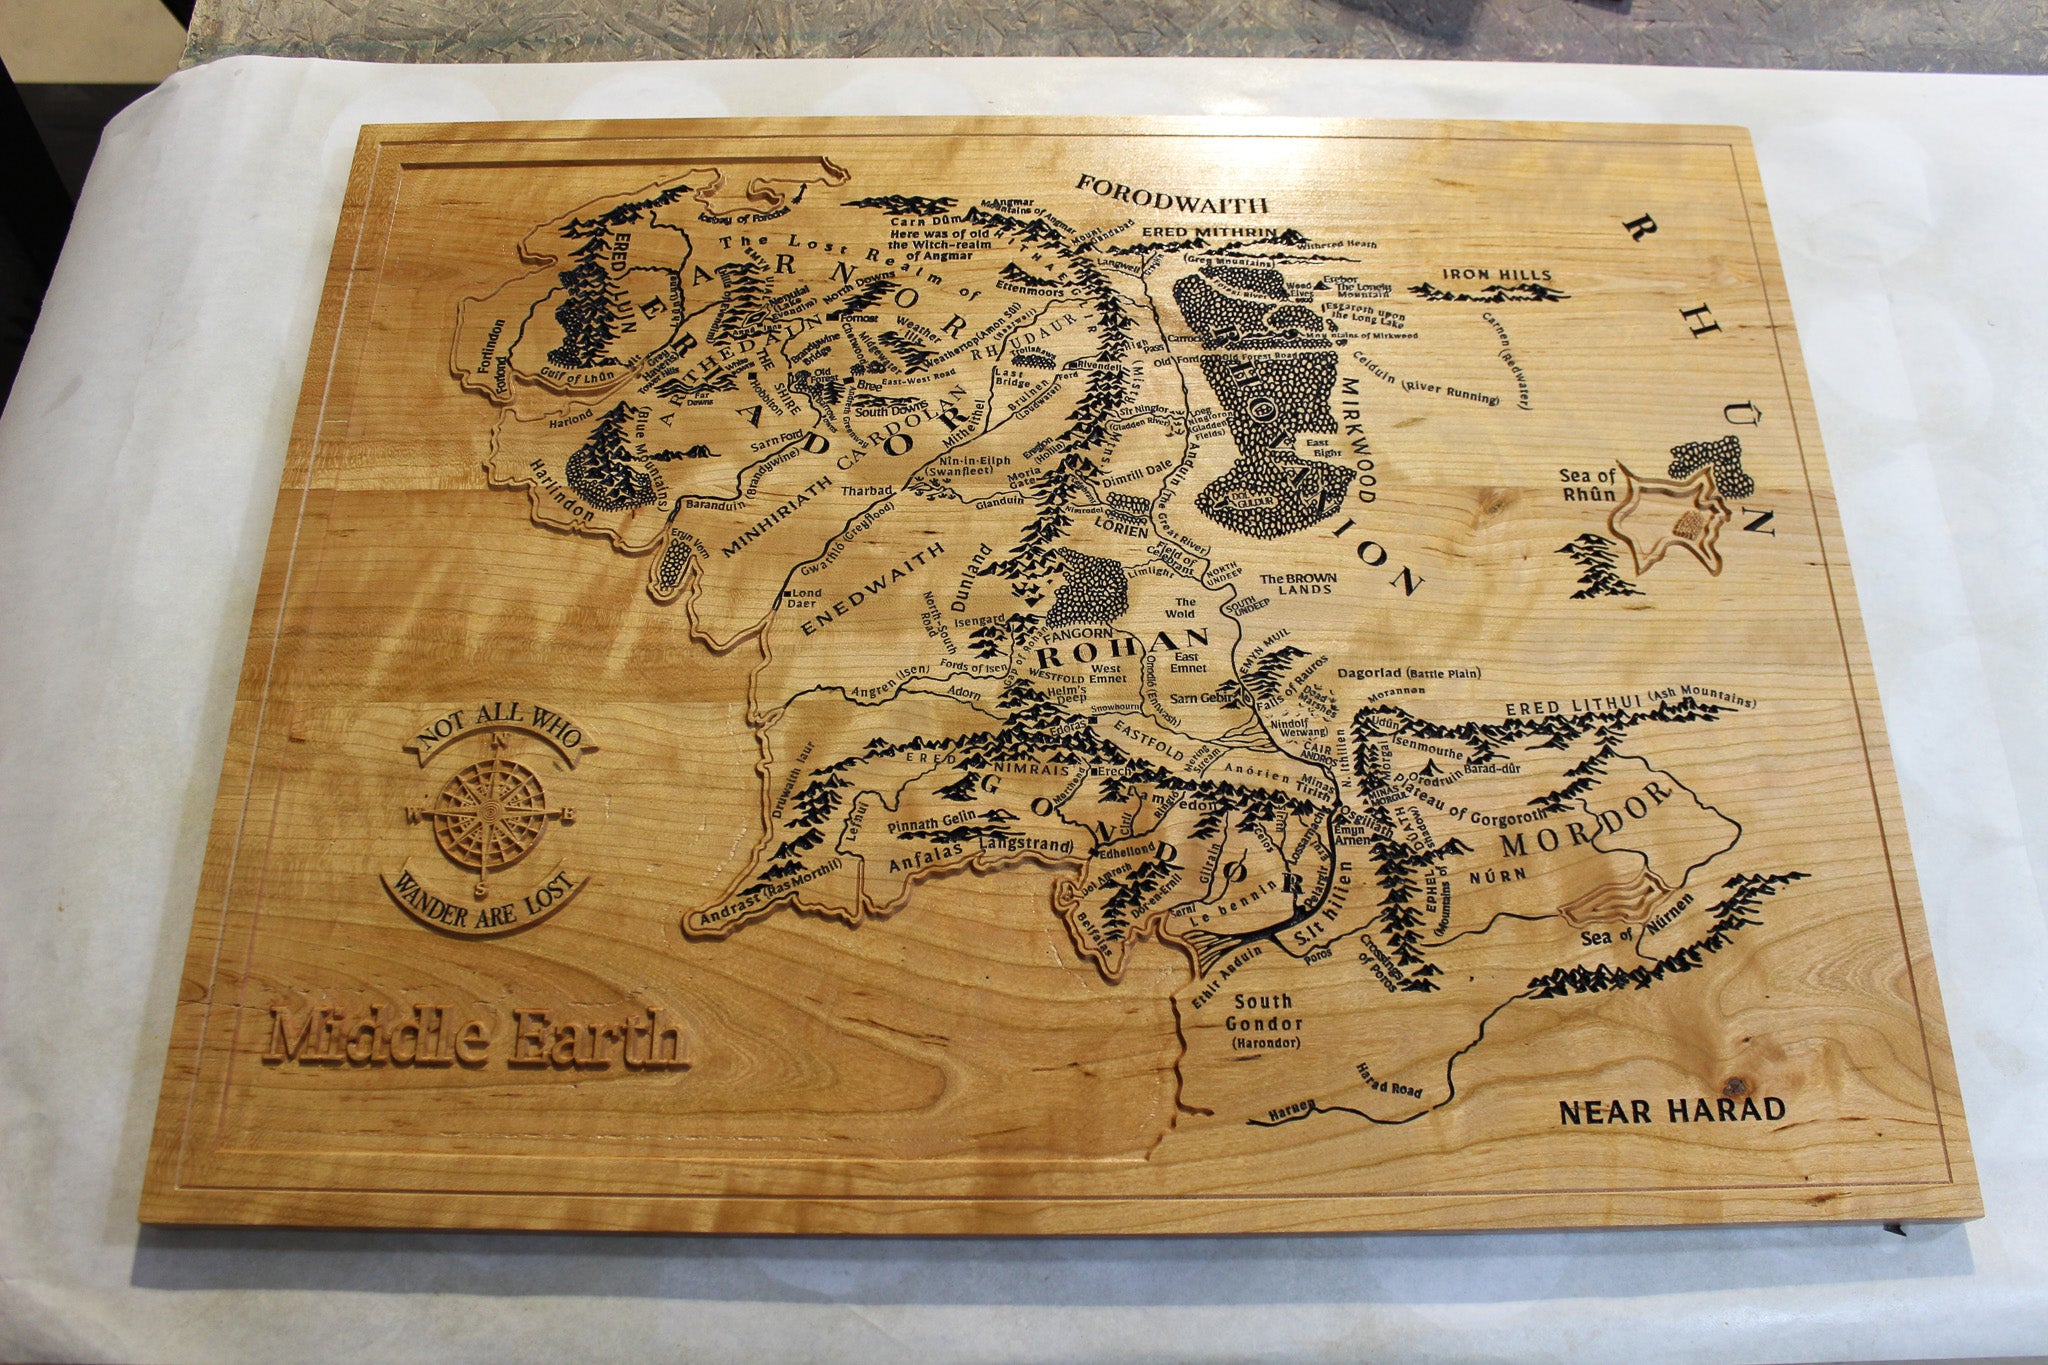 LORD OF THE RINGS REPLICA *MIDDLE EARTH MAP* POSTER | eBay